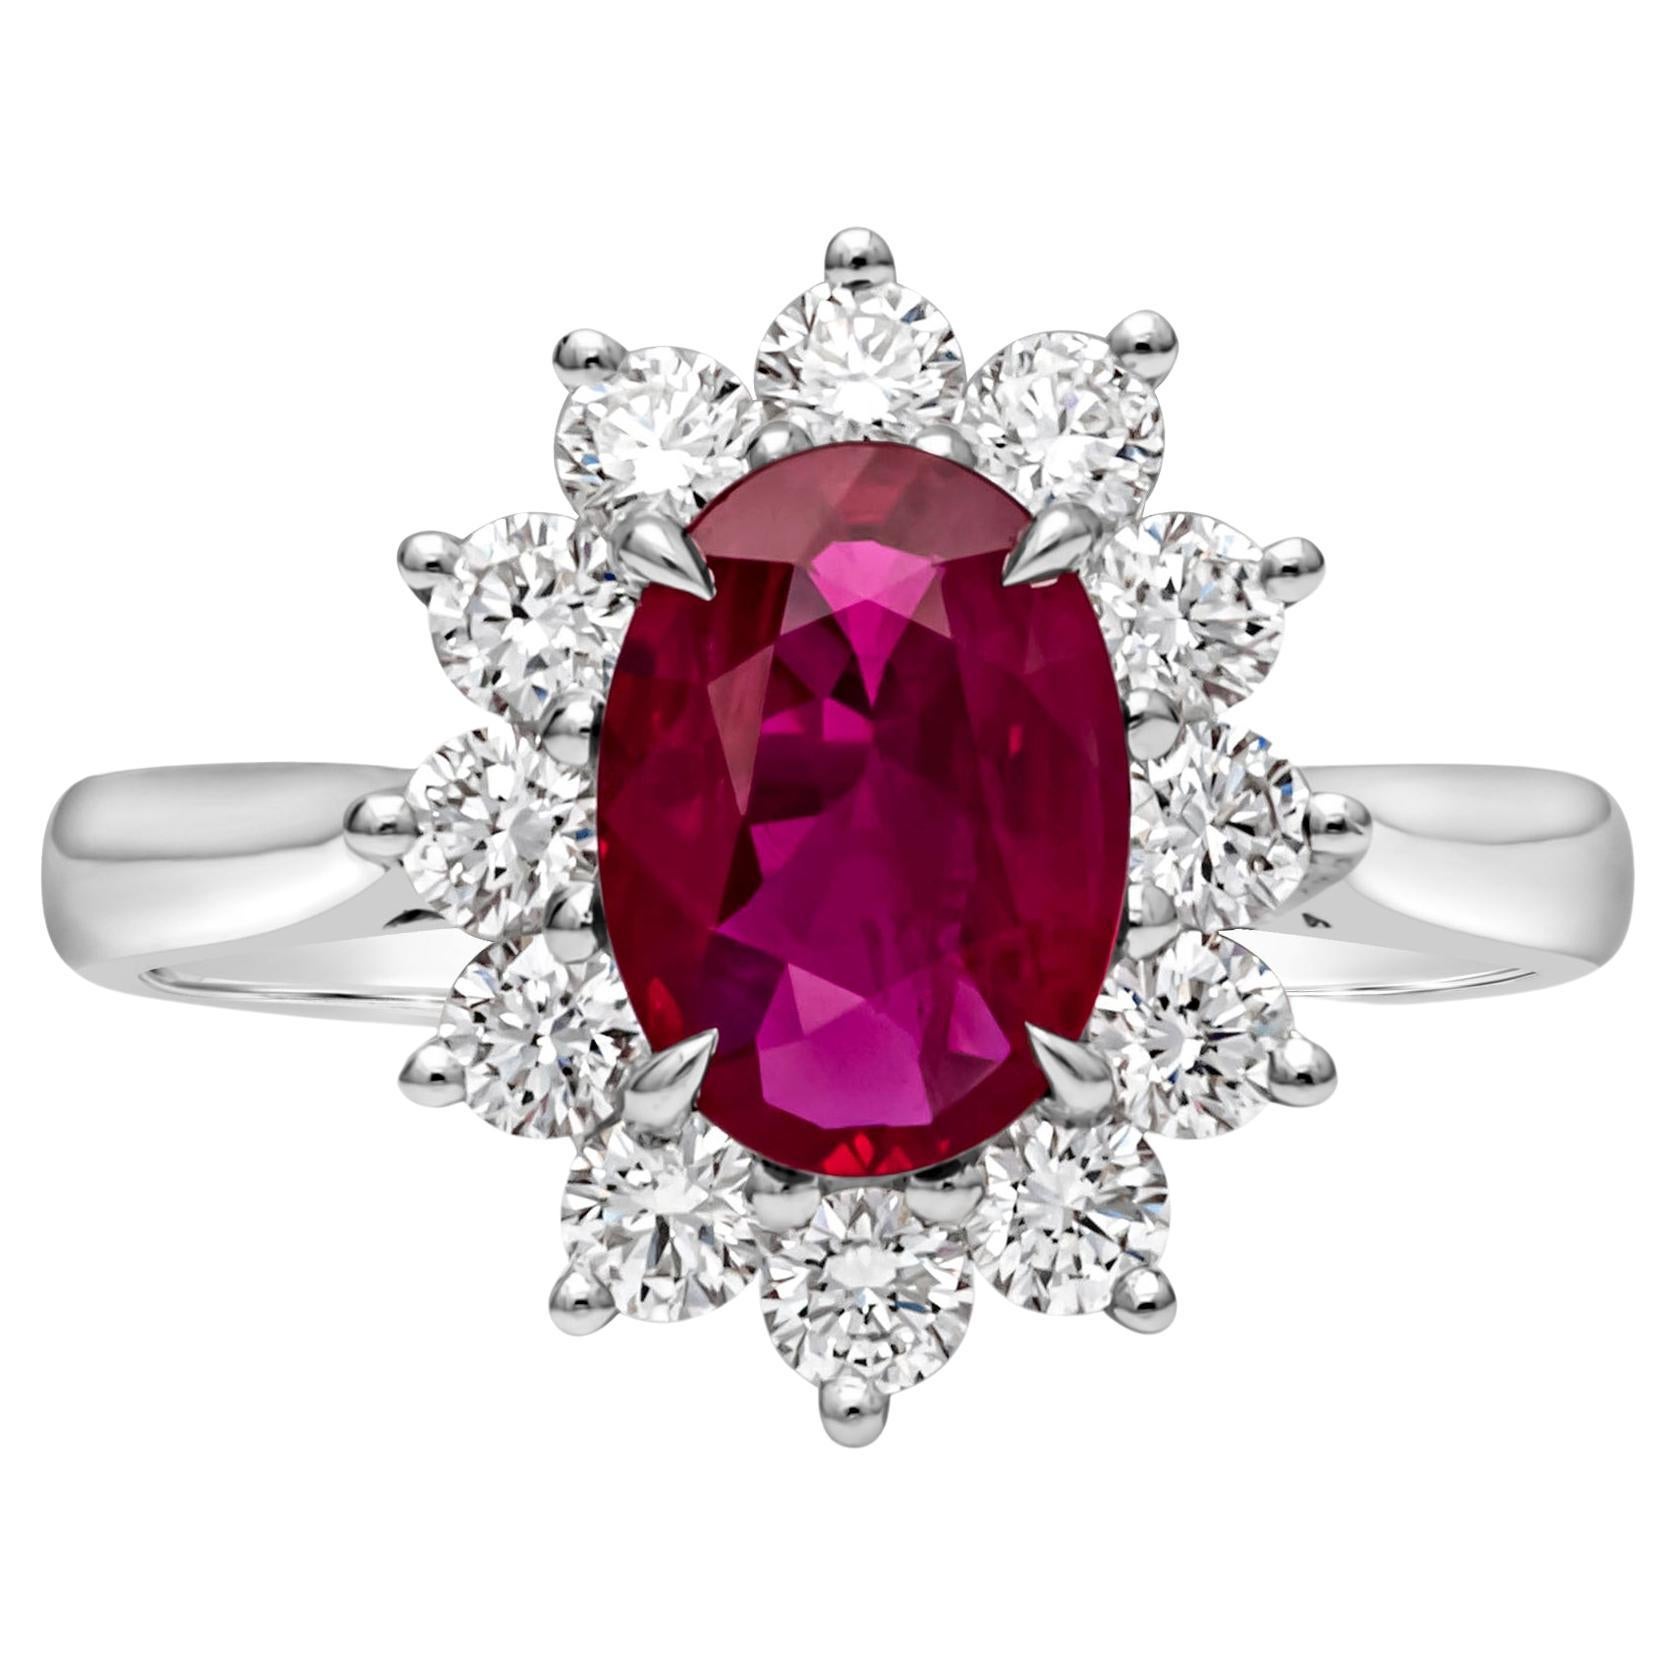 Roman Malakov 1.50 Carats Oval Cut Ruby with Diamond Floral Engagement Ring